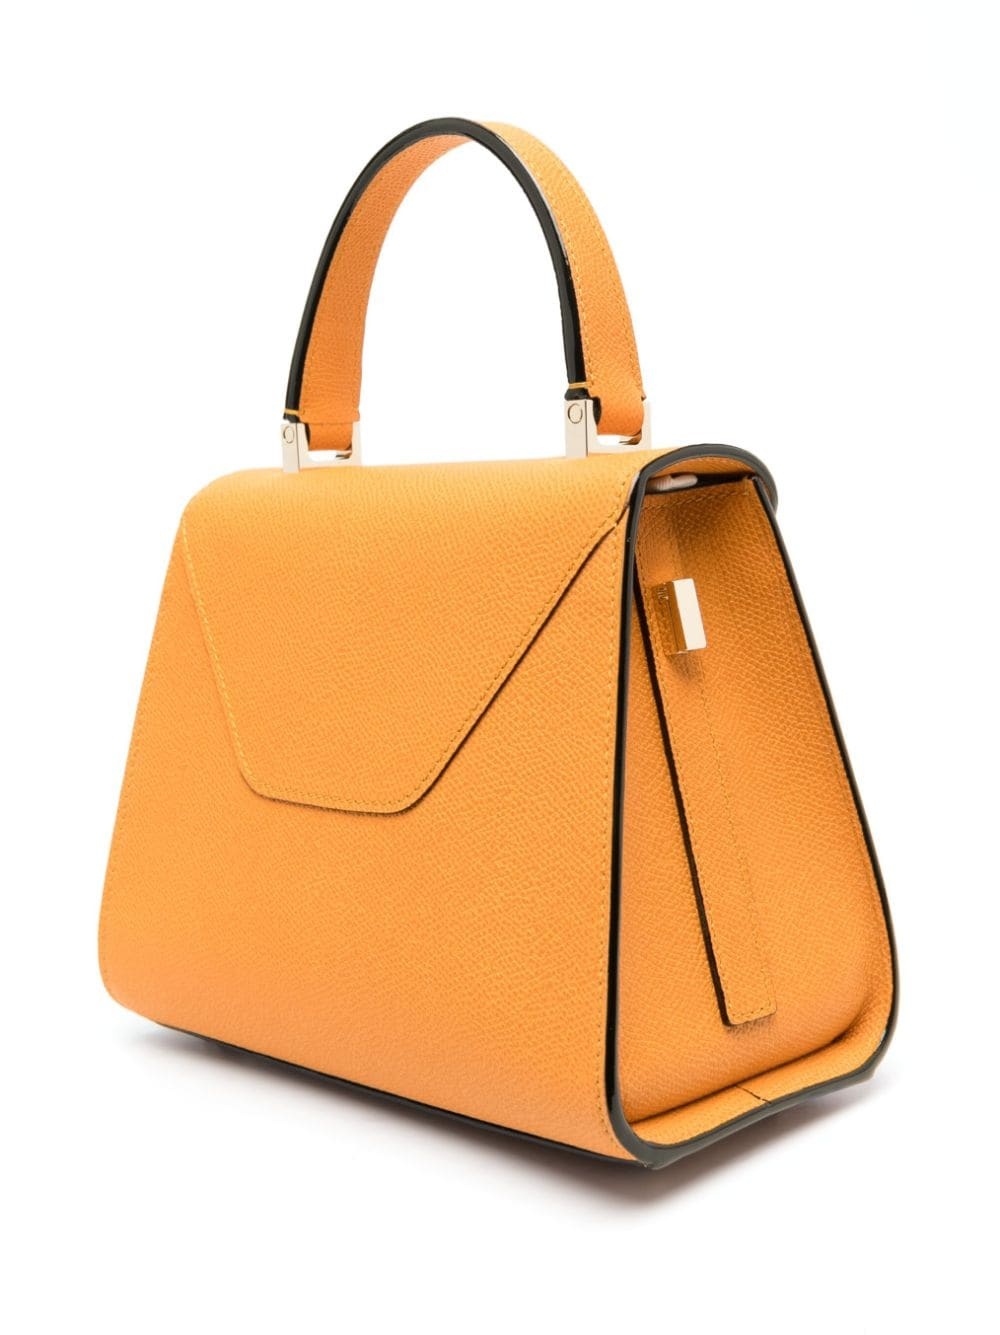 Iside leather tote bag - 4